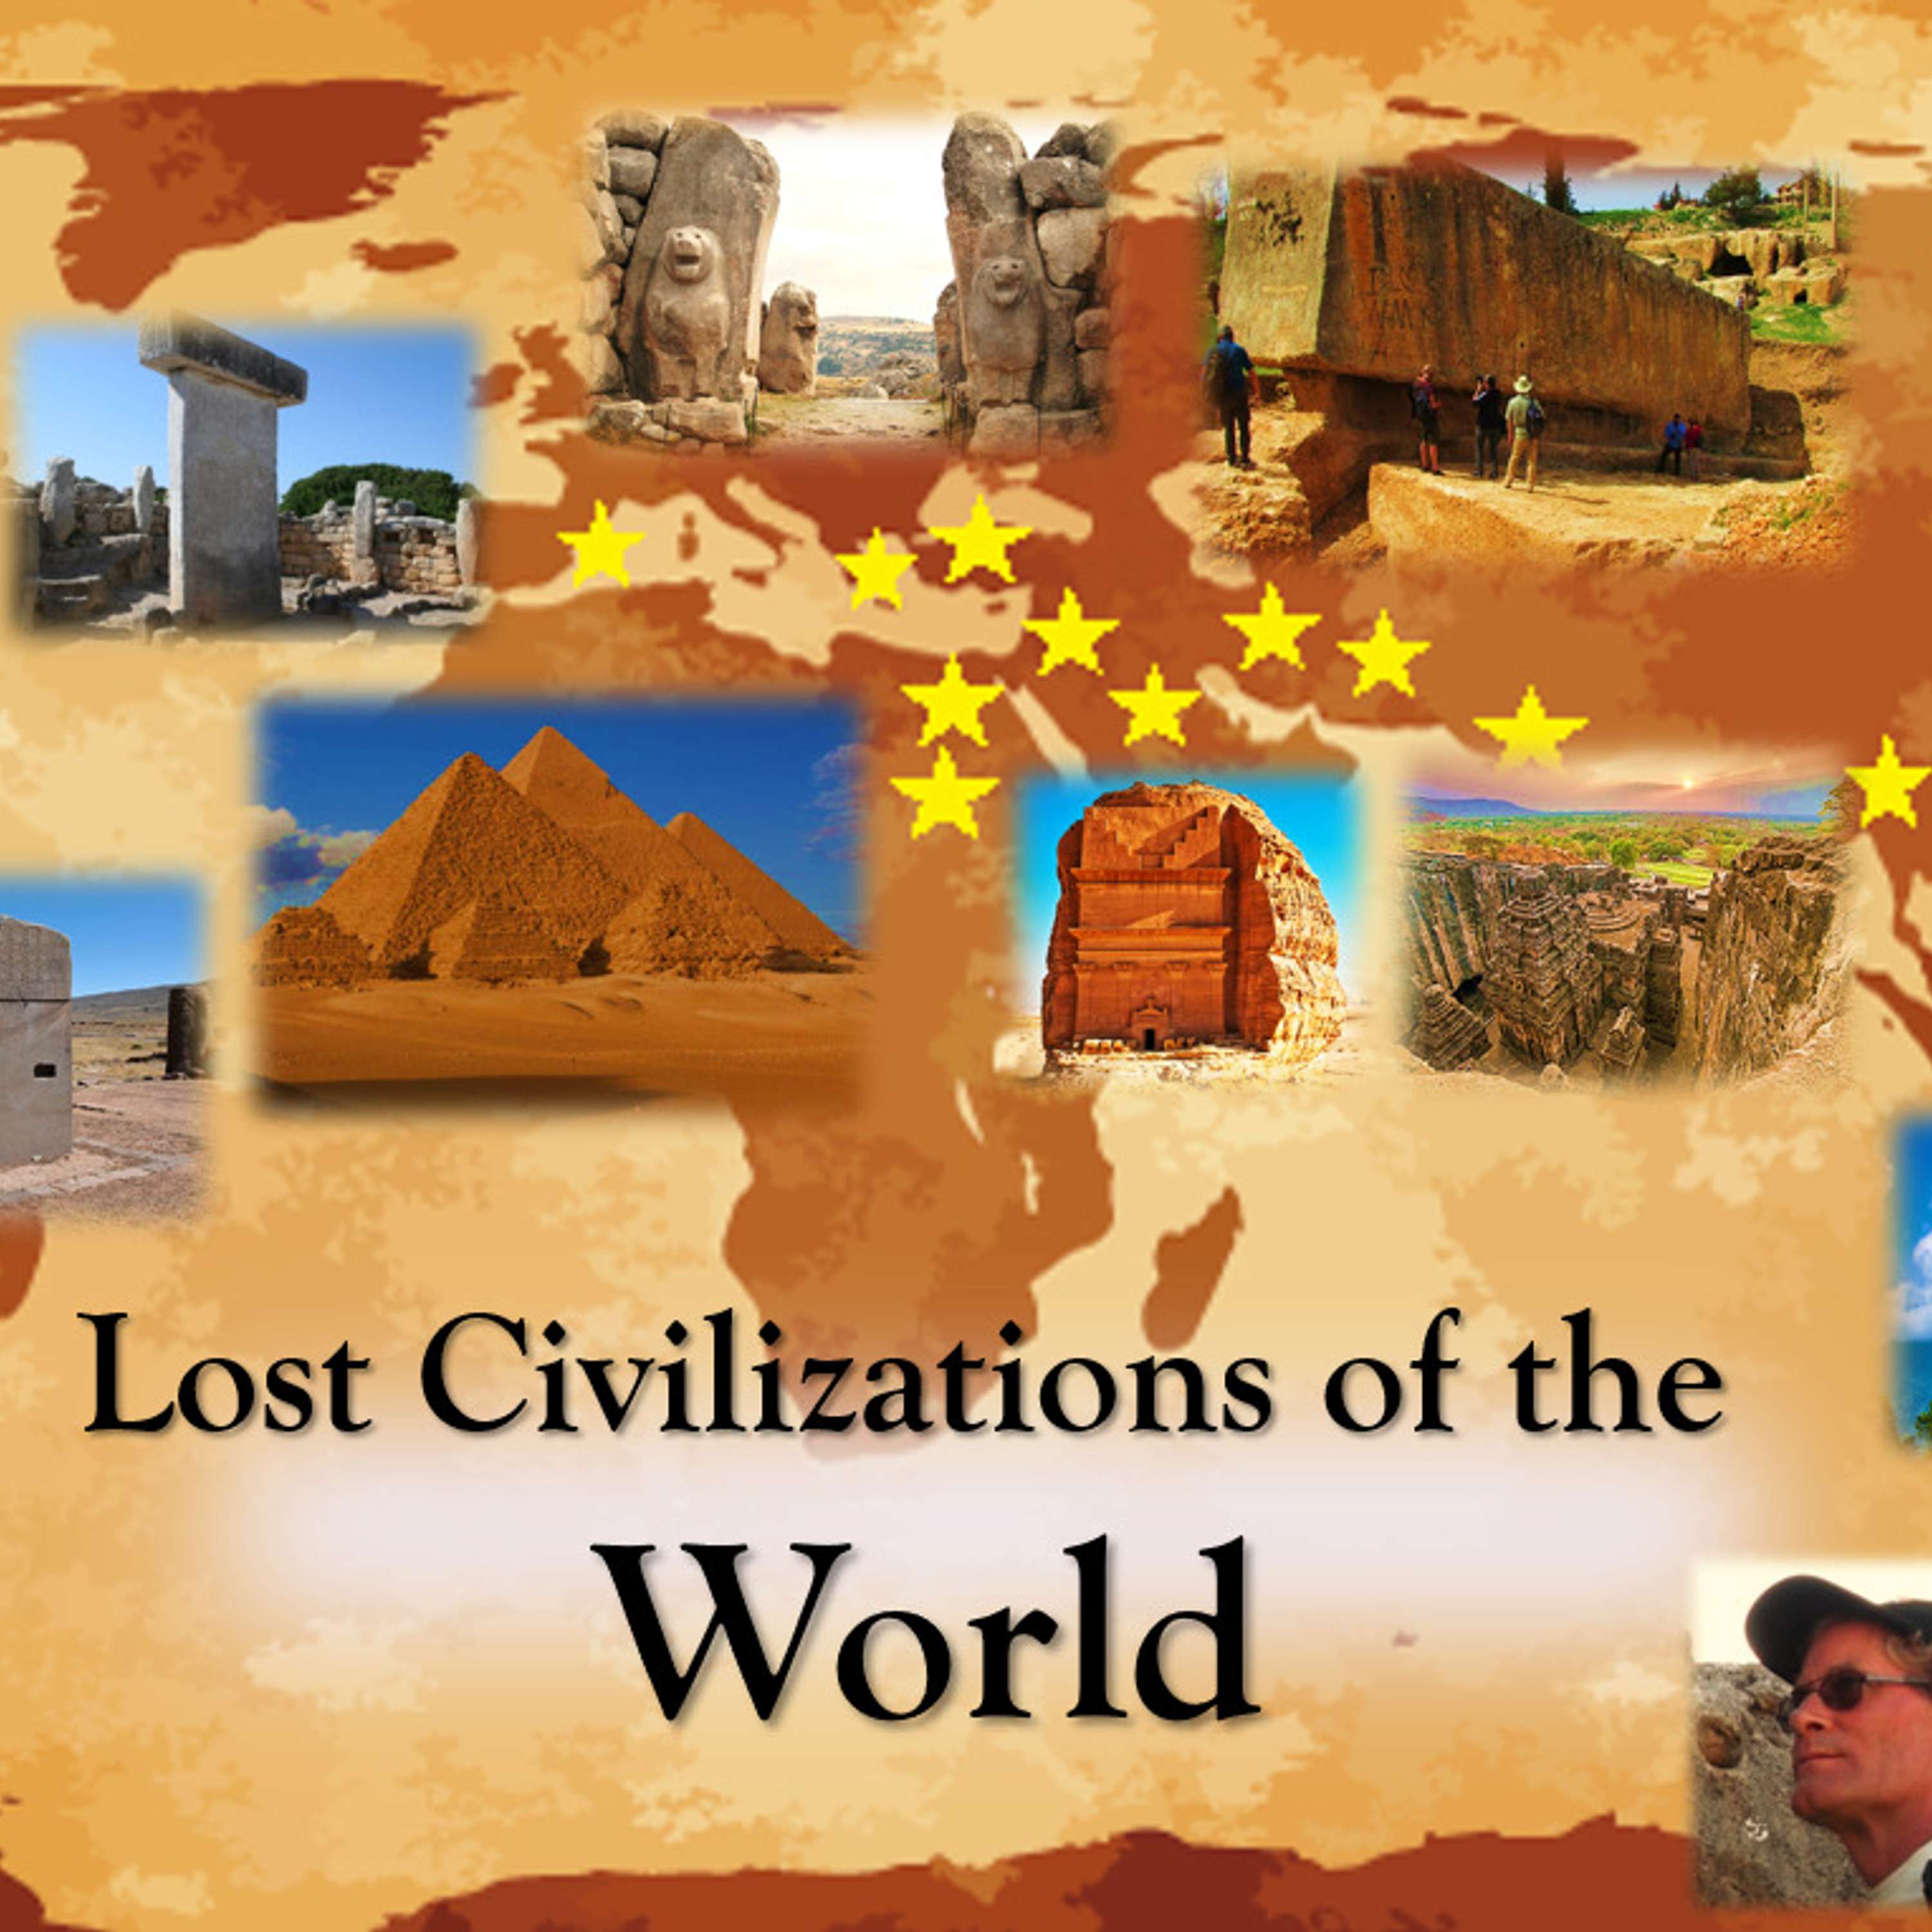 Lost Civilizations of the World - Full Presentation– Mastermind Discussions #12 - Brien Foerster & Matthew LaCroix